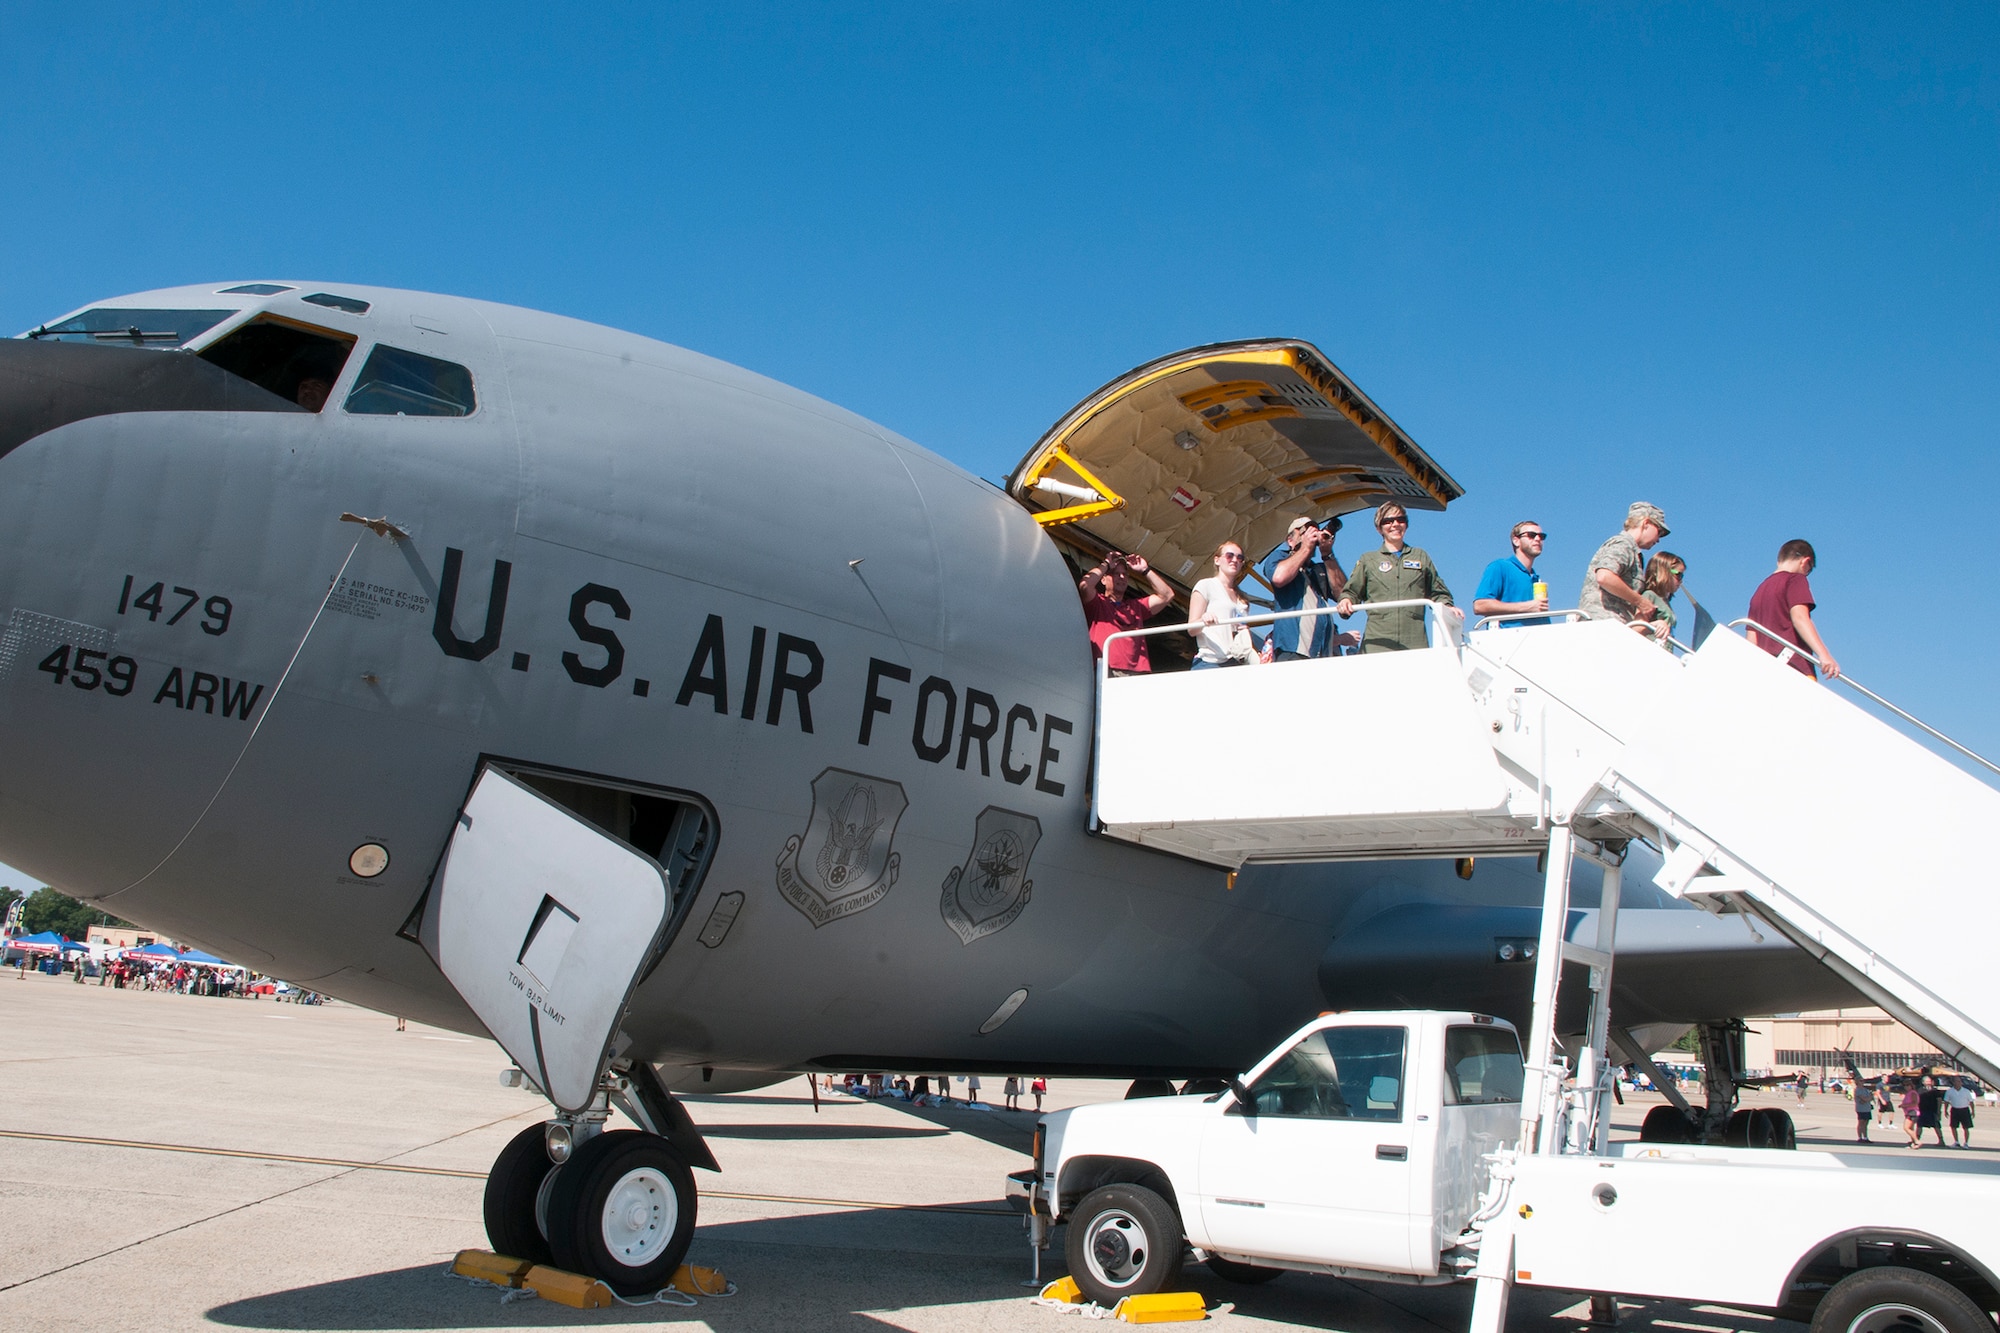 Patrons exit a 459th Air Refueling Wing KC-135R Stratotanker on the Joint Base Andrews flight line after touring the interior during the JBA Air Show Sept. 18, 2015.The 459th Airlift Wing provided tours of the aircraft and illustrated medical and refueling capabilities to the public during the open house. (U.S. Air Force photo/Staff Sgt. Kat Justen)